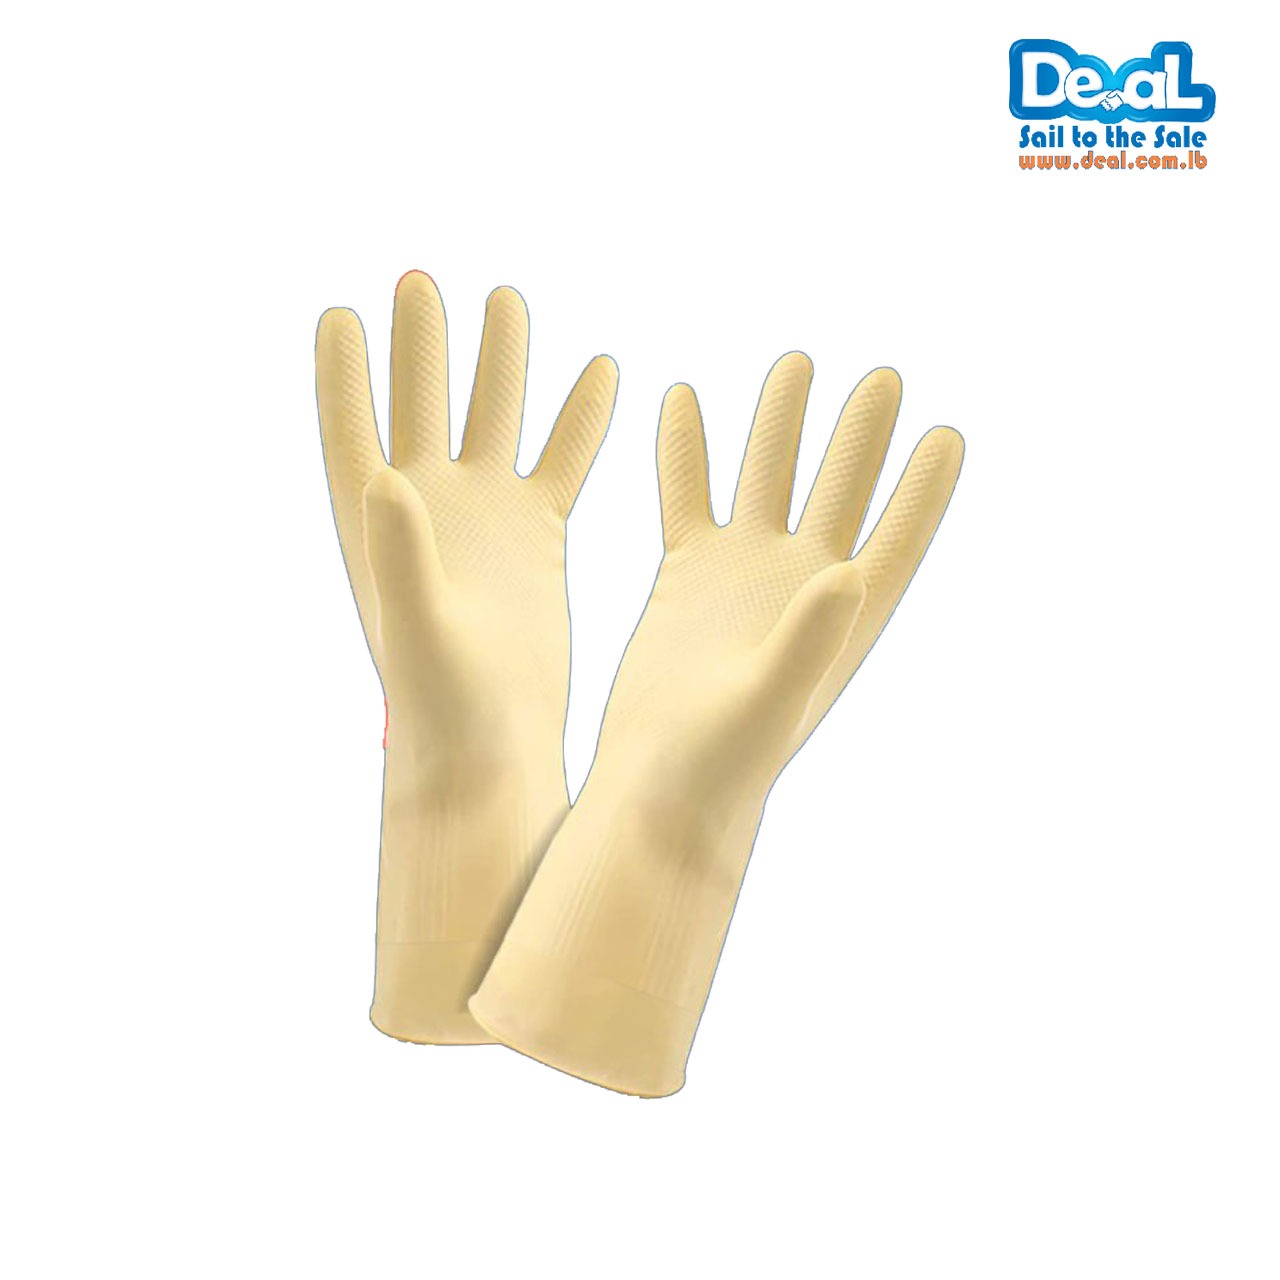 High Quality Protective Deal Gloves | Large Size